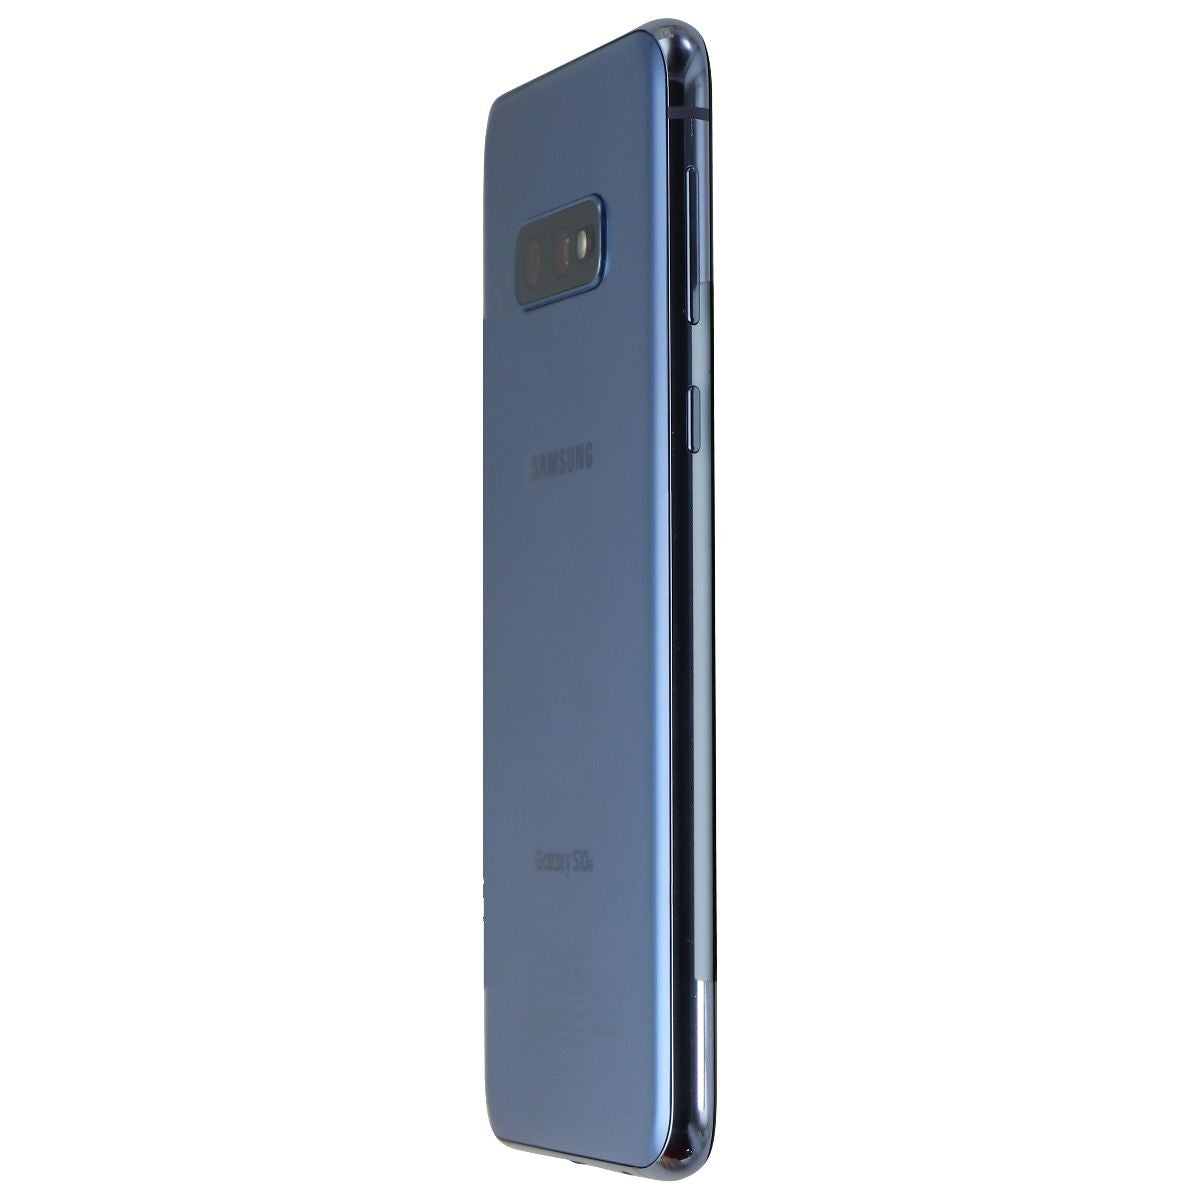 Samsung Galaxy S10e (5.8-in) SM-G970U (GSM + CDMA) - 256GB/Prism Blue Cell Phones & Smartphones Samsung    - Simple Cell Bulk Wholesale Pricing - USA Seller